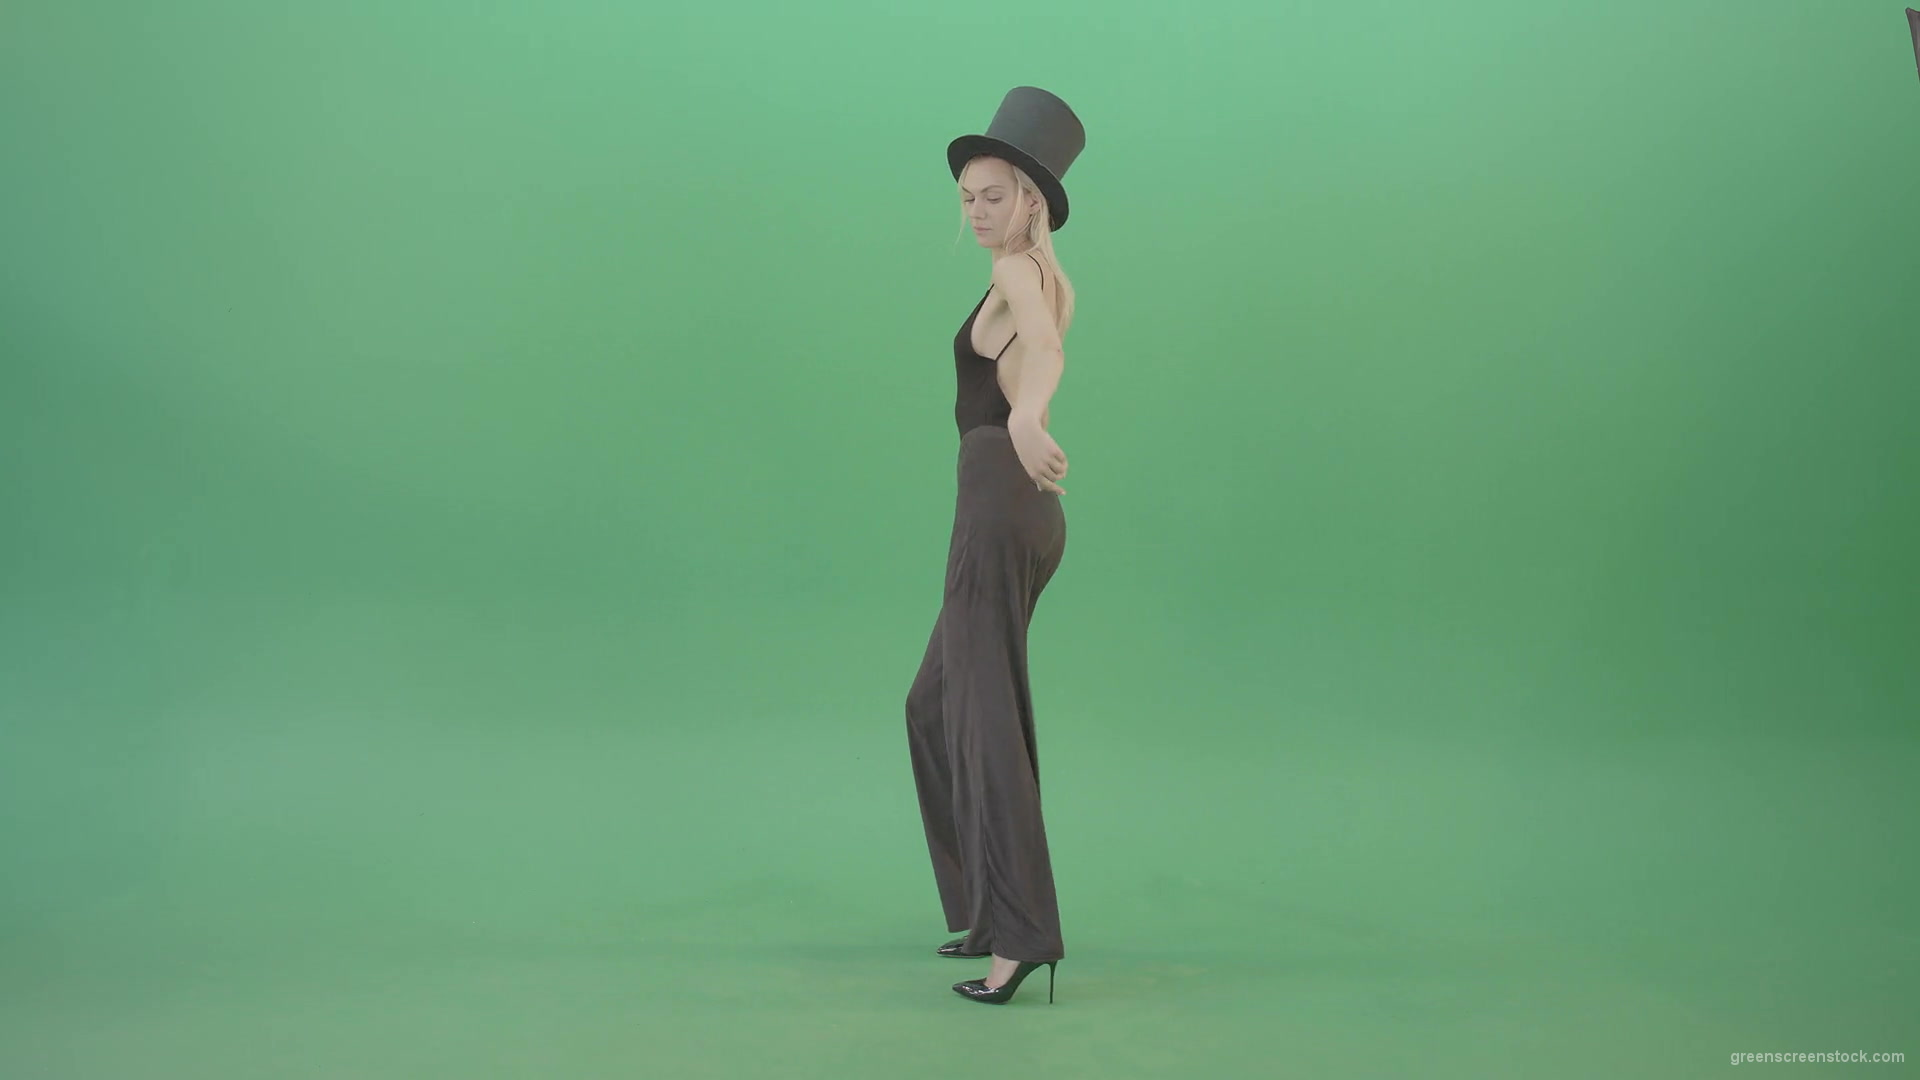 Girl-with-black-busines-cylinder-hat-dancing-isolated-on-green-background-4K-Video-Footage-1920_005 Green Screen Stock